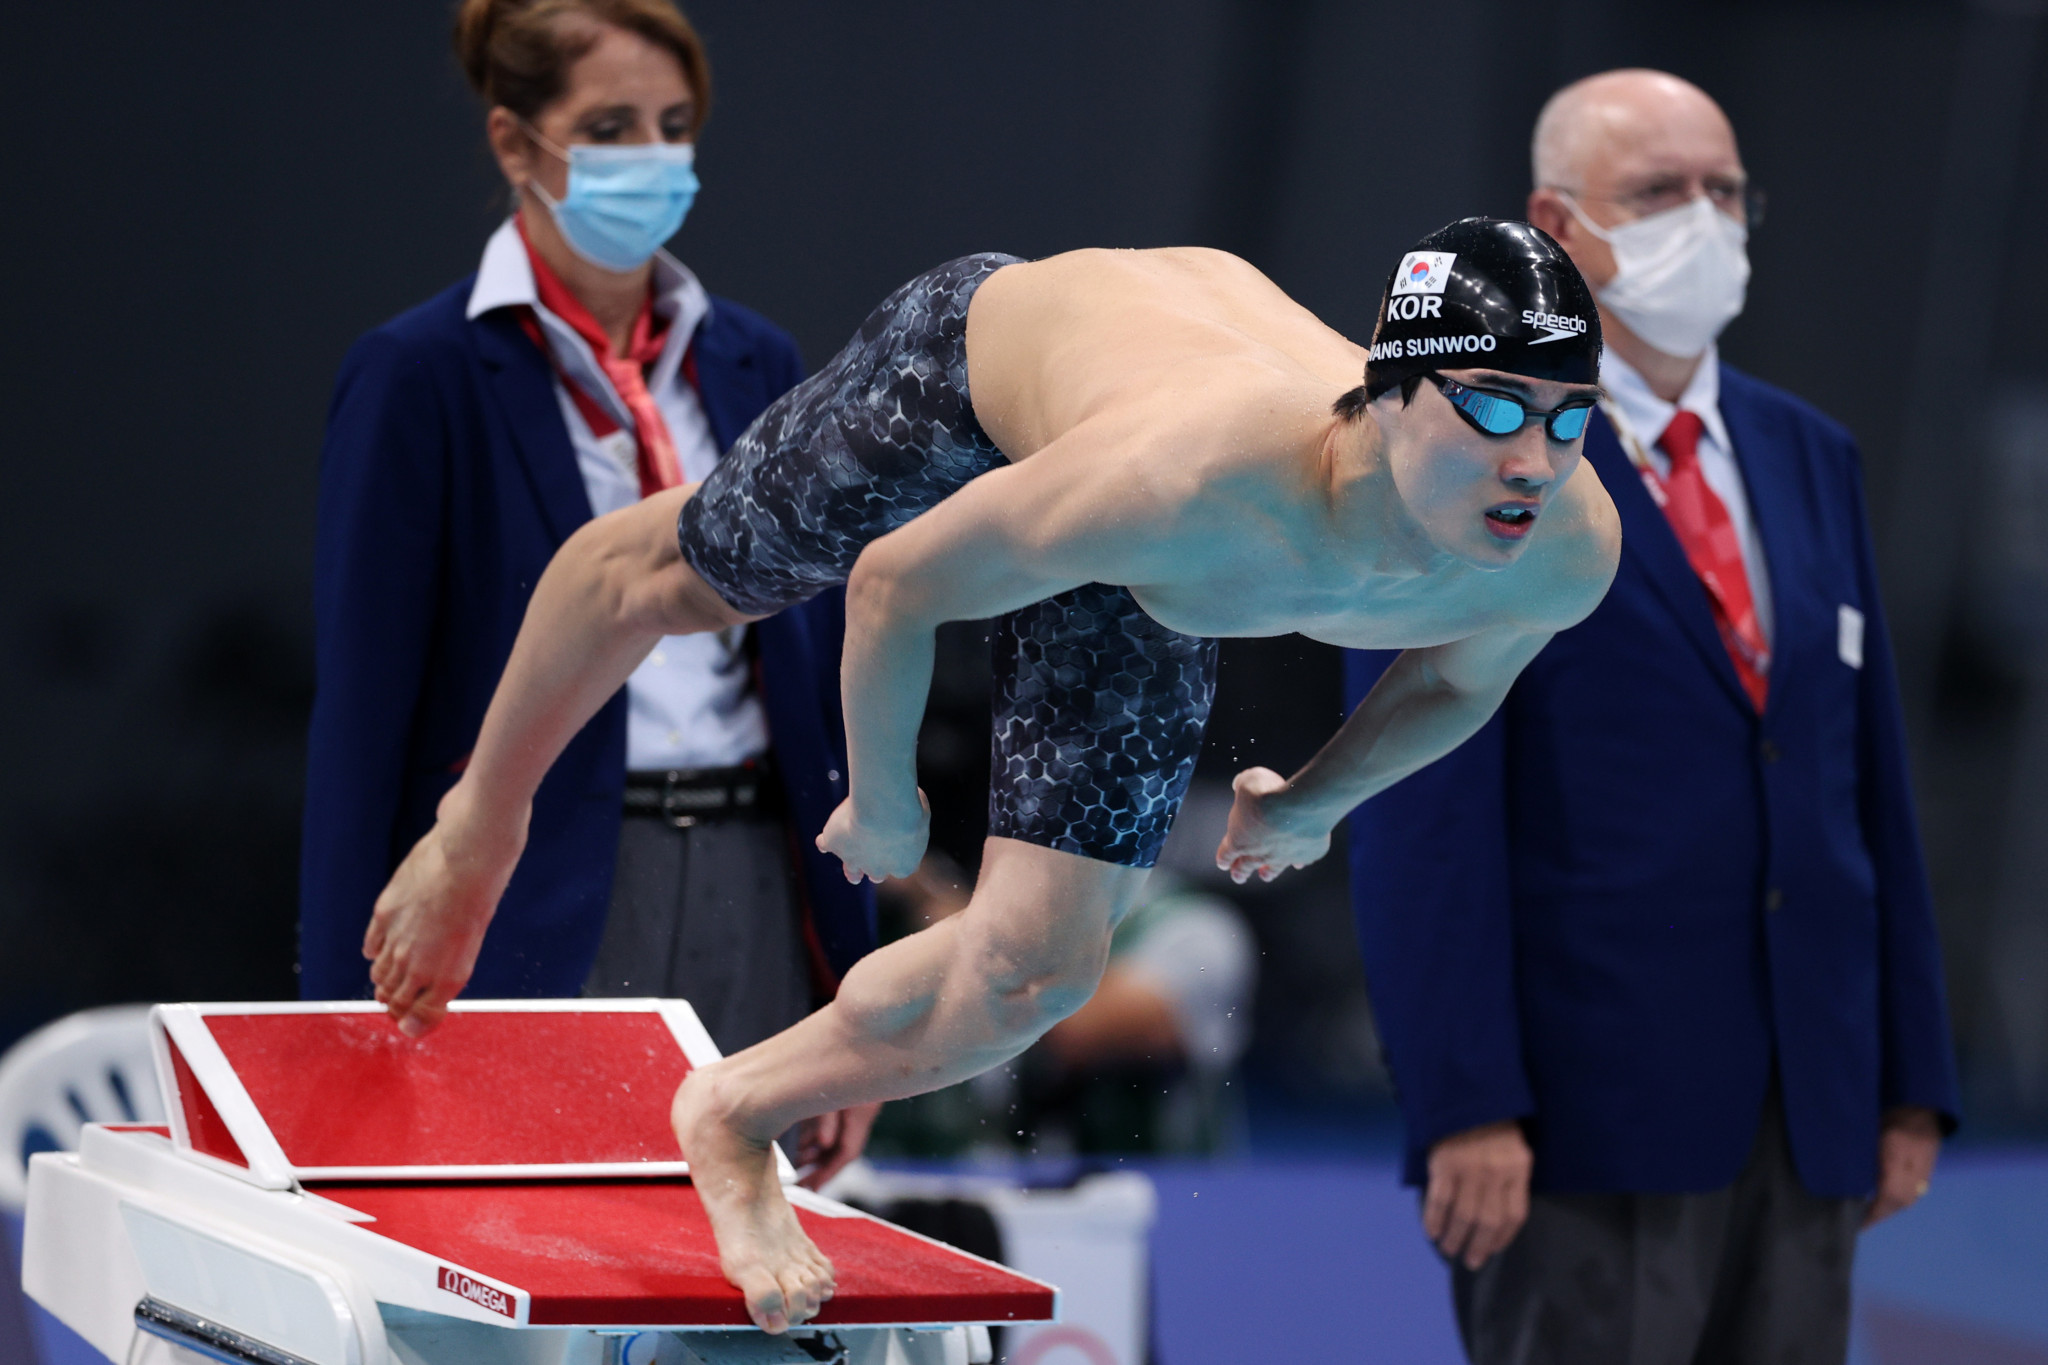 Hwang Sun-woo won the only Asian swimmer in both the men's 100m and 200m freestyle finals at the Olympics ©Getty Images